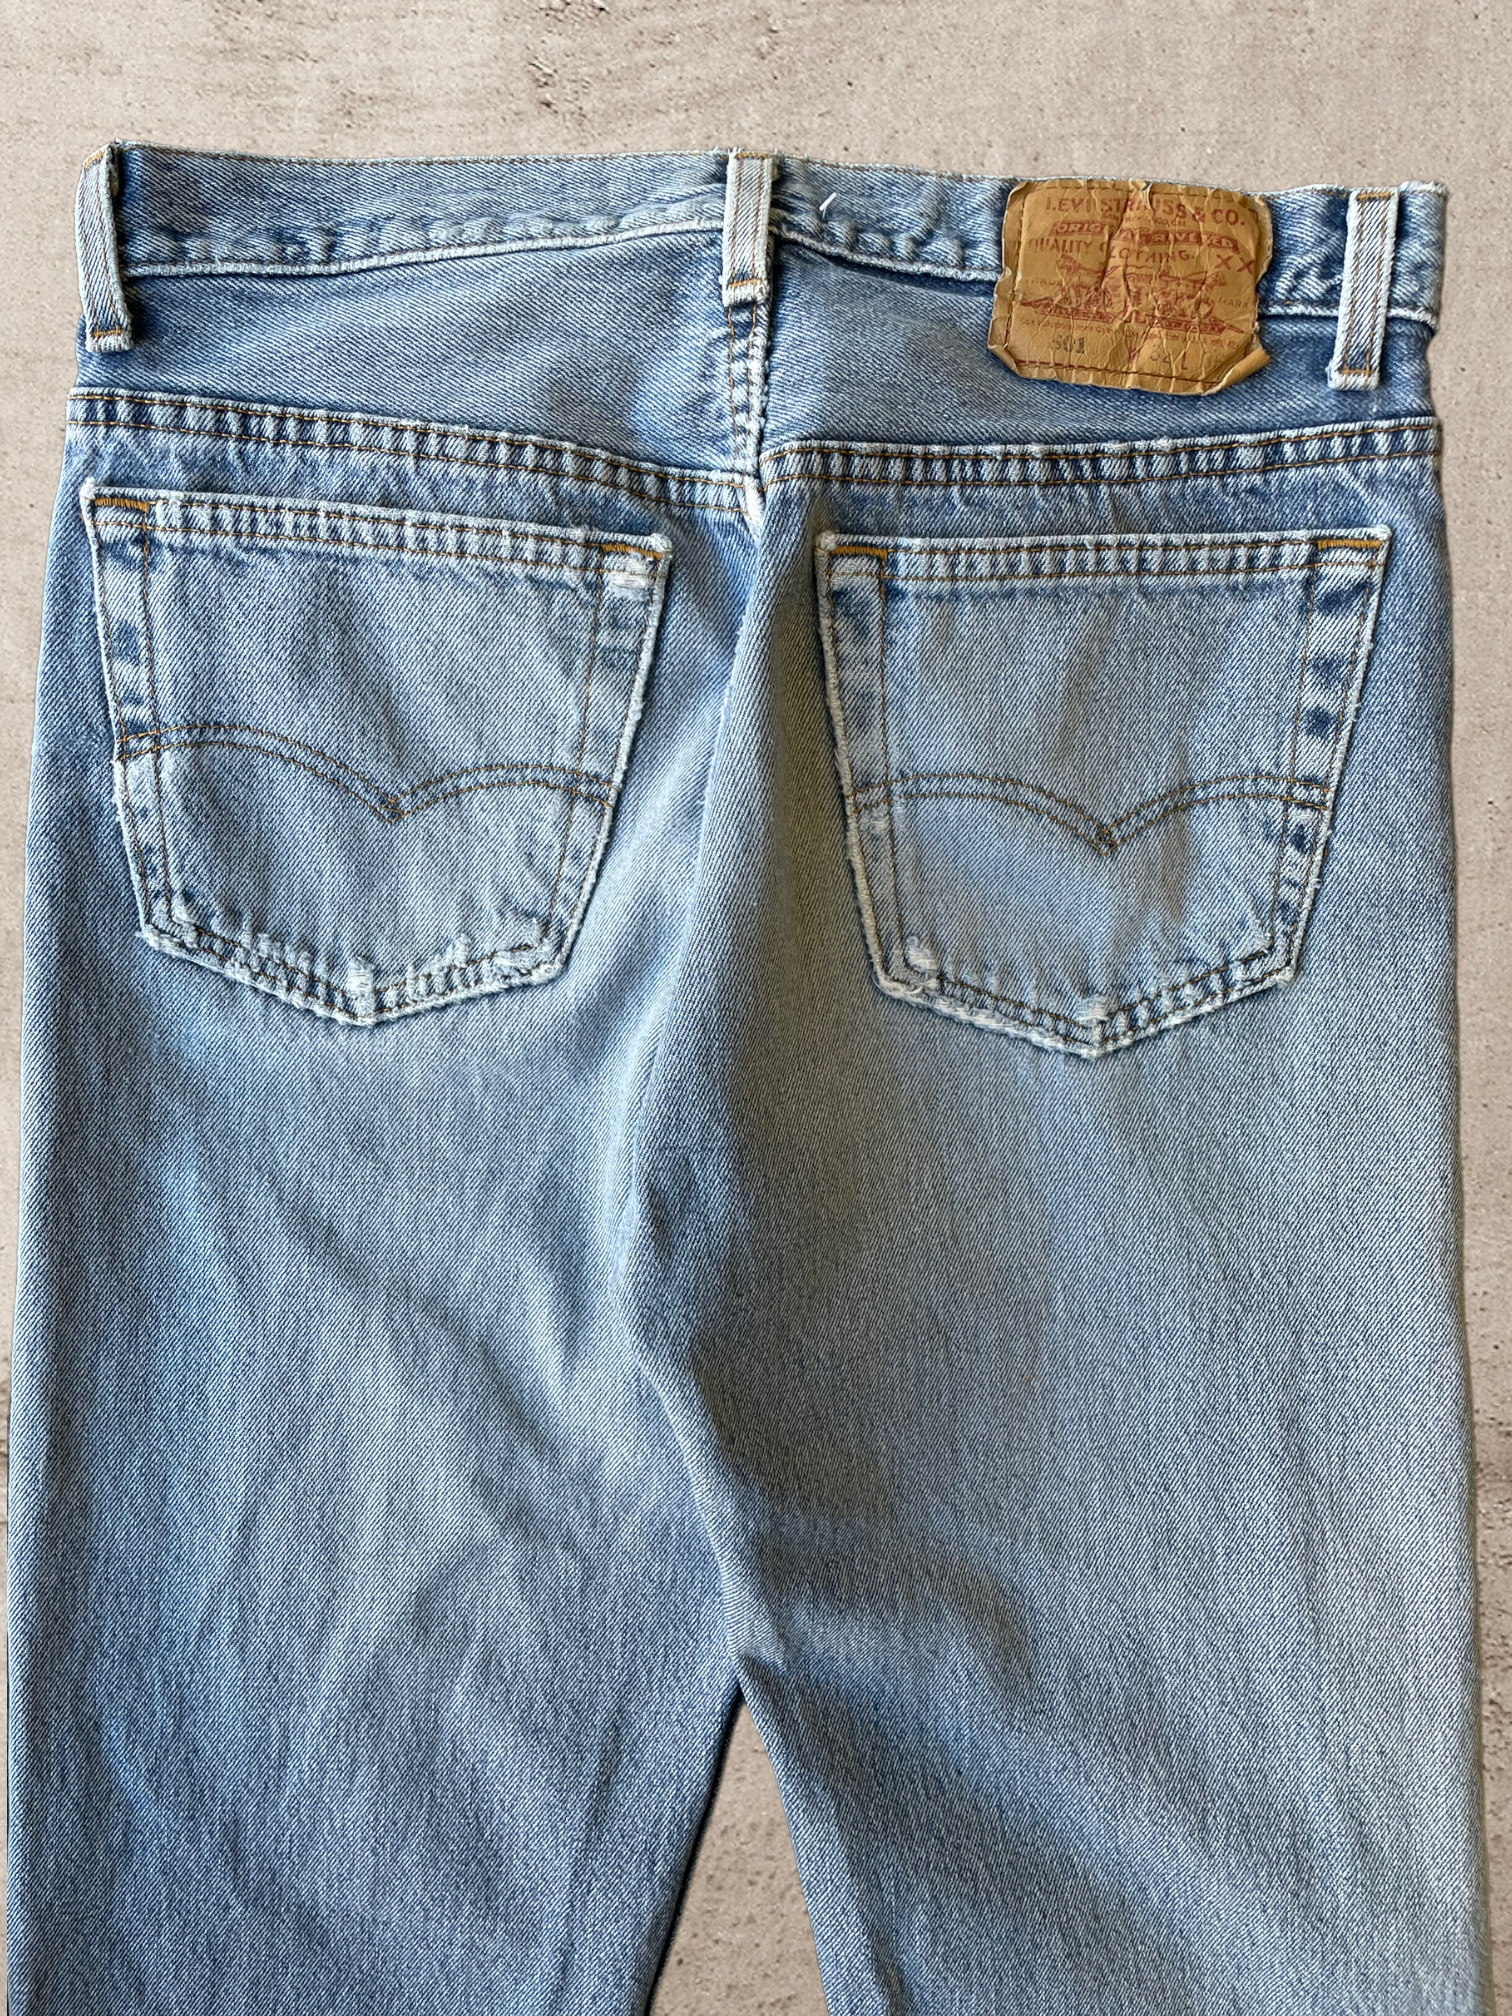 90s Levi 501 Repaired Jeans -29x33.5